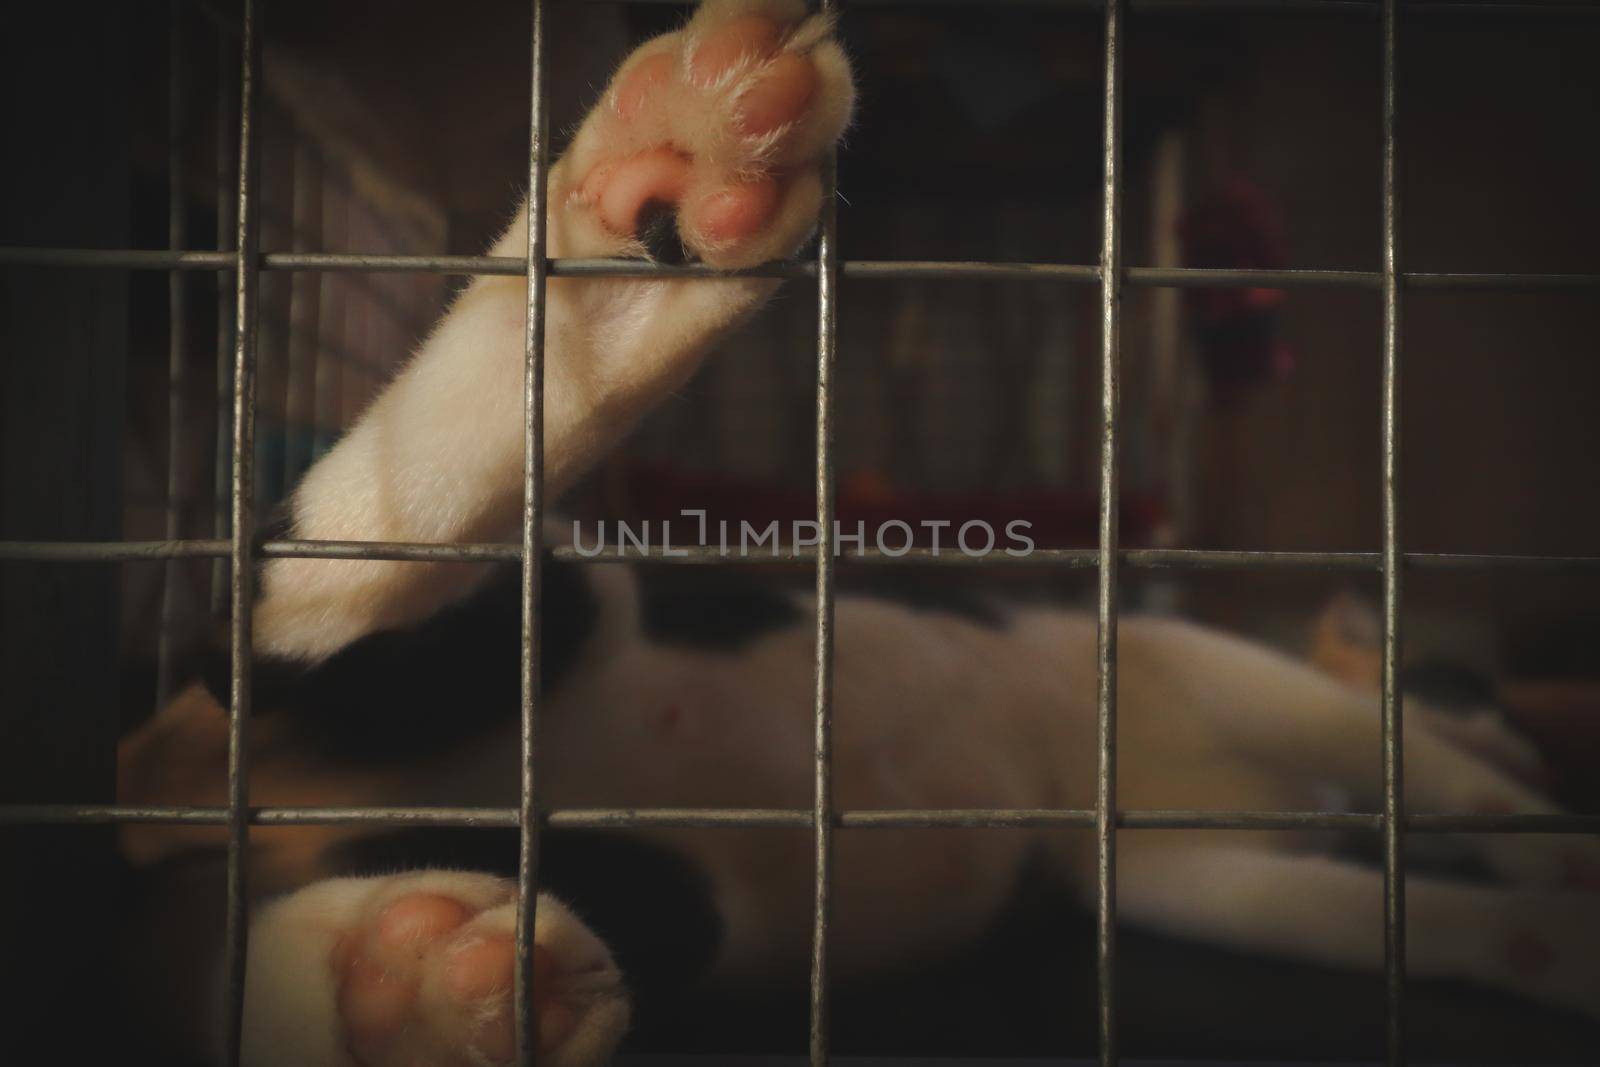 A rescued cat's paw against a cage showing the concept of animal rescue, volunteerism and hope for stray animals